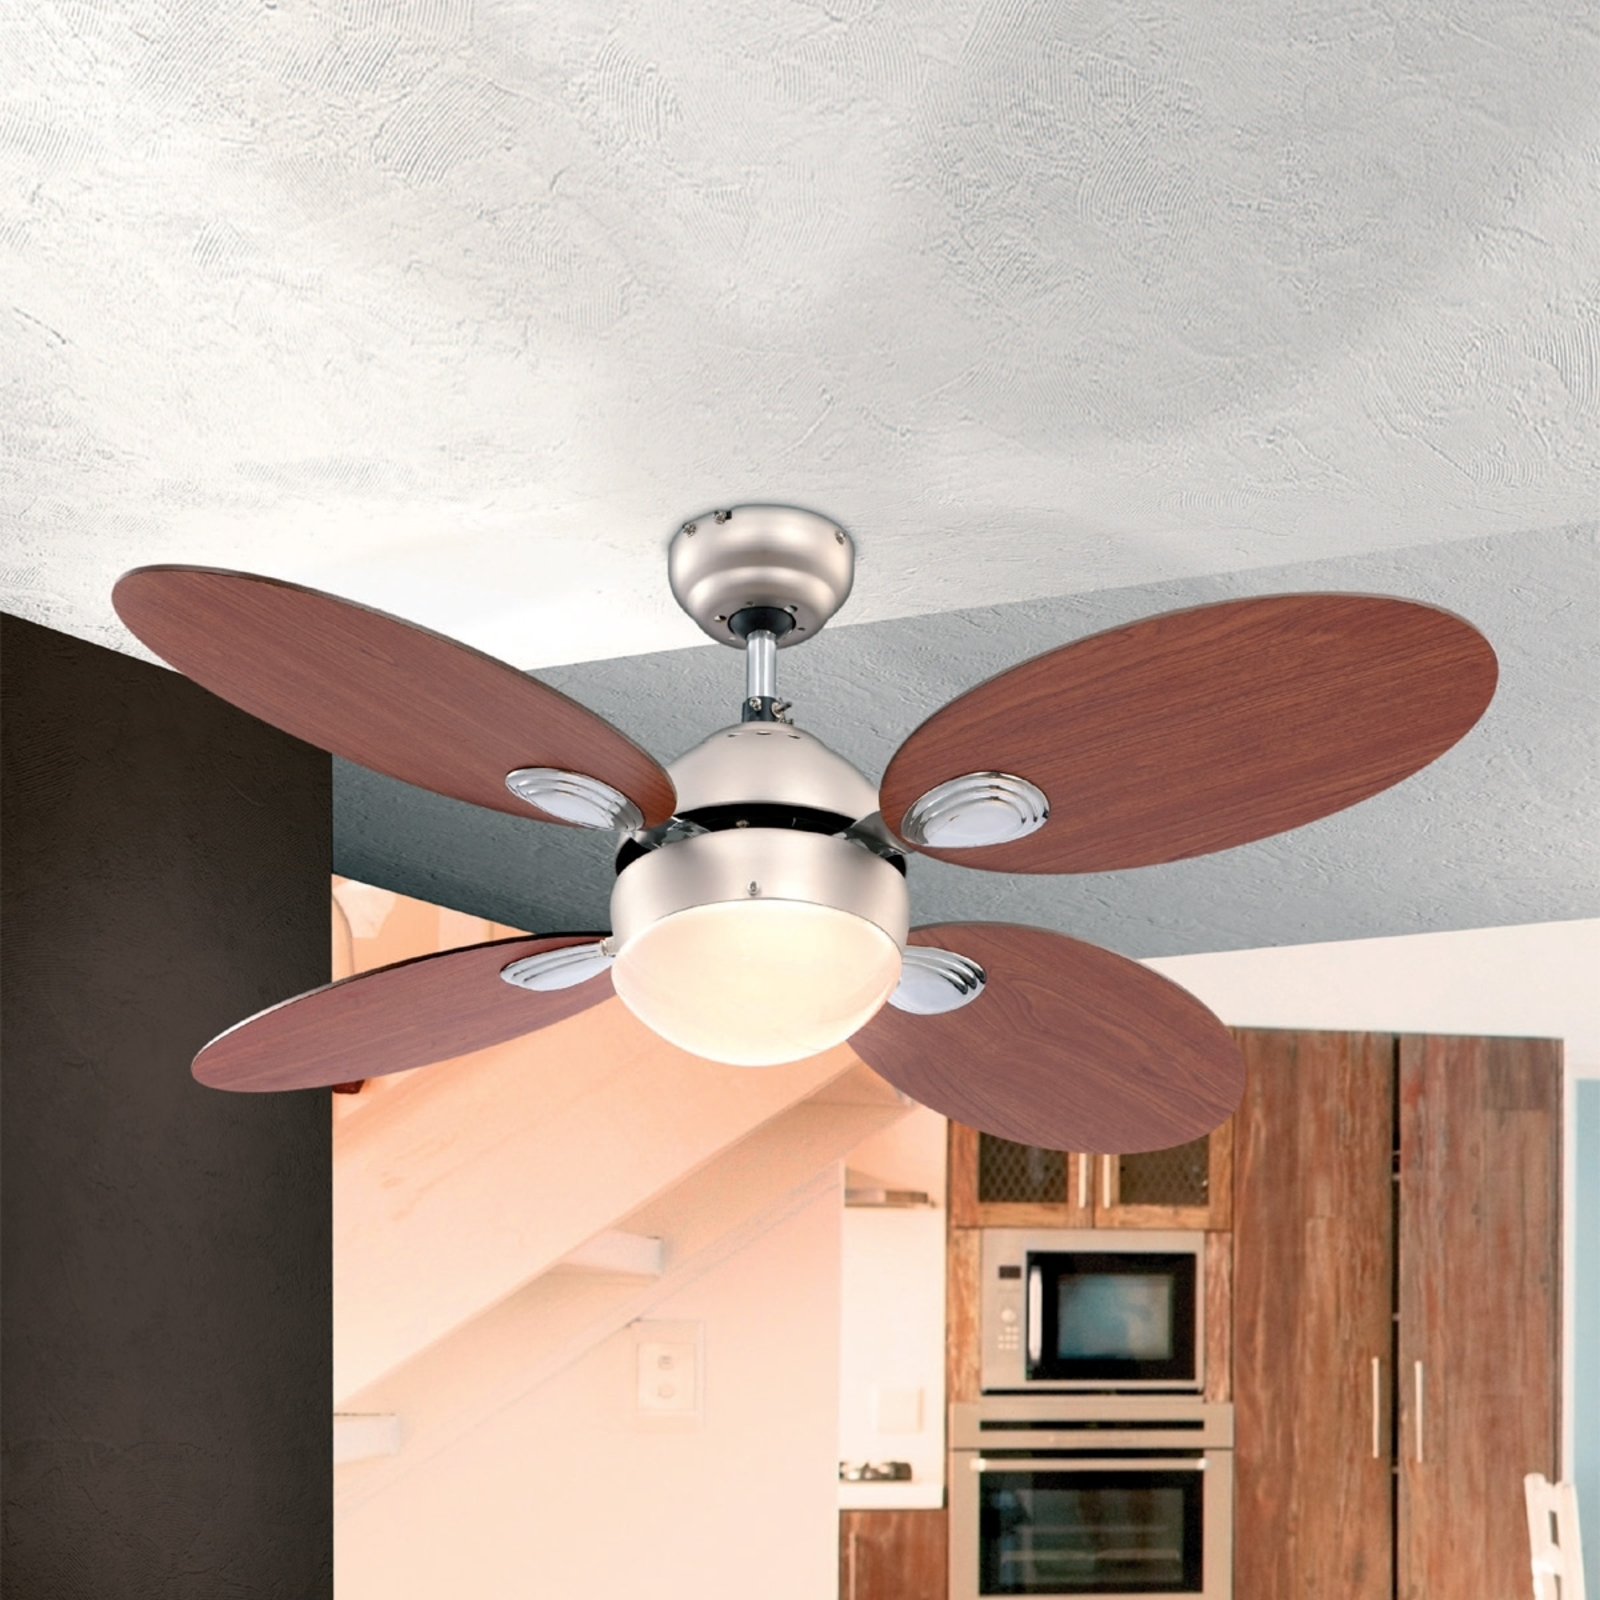 Wade ceiling fan with pull switch